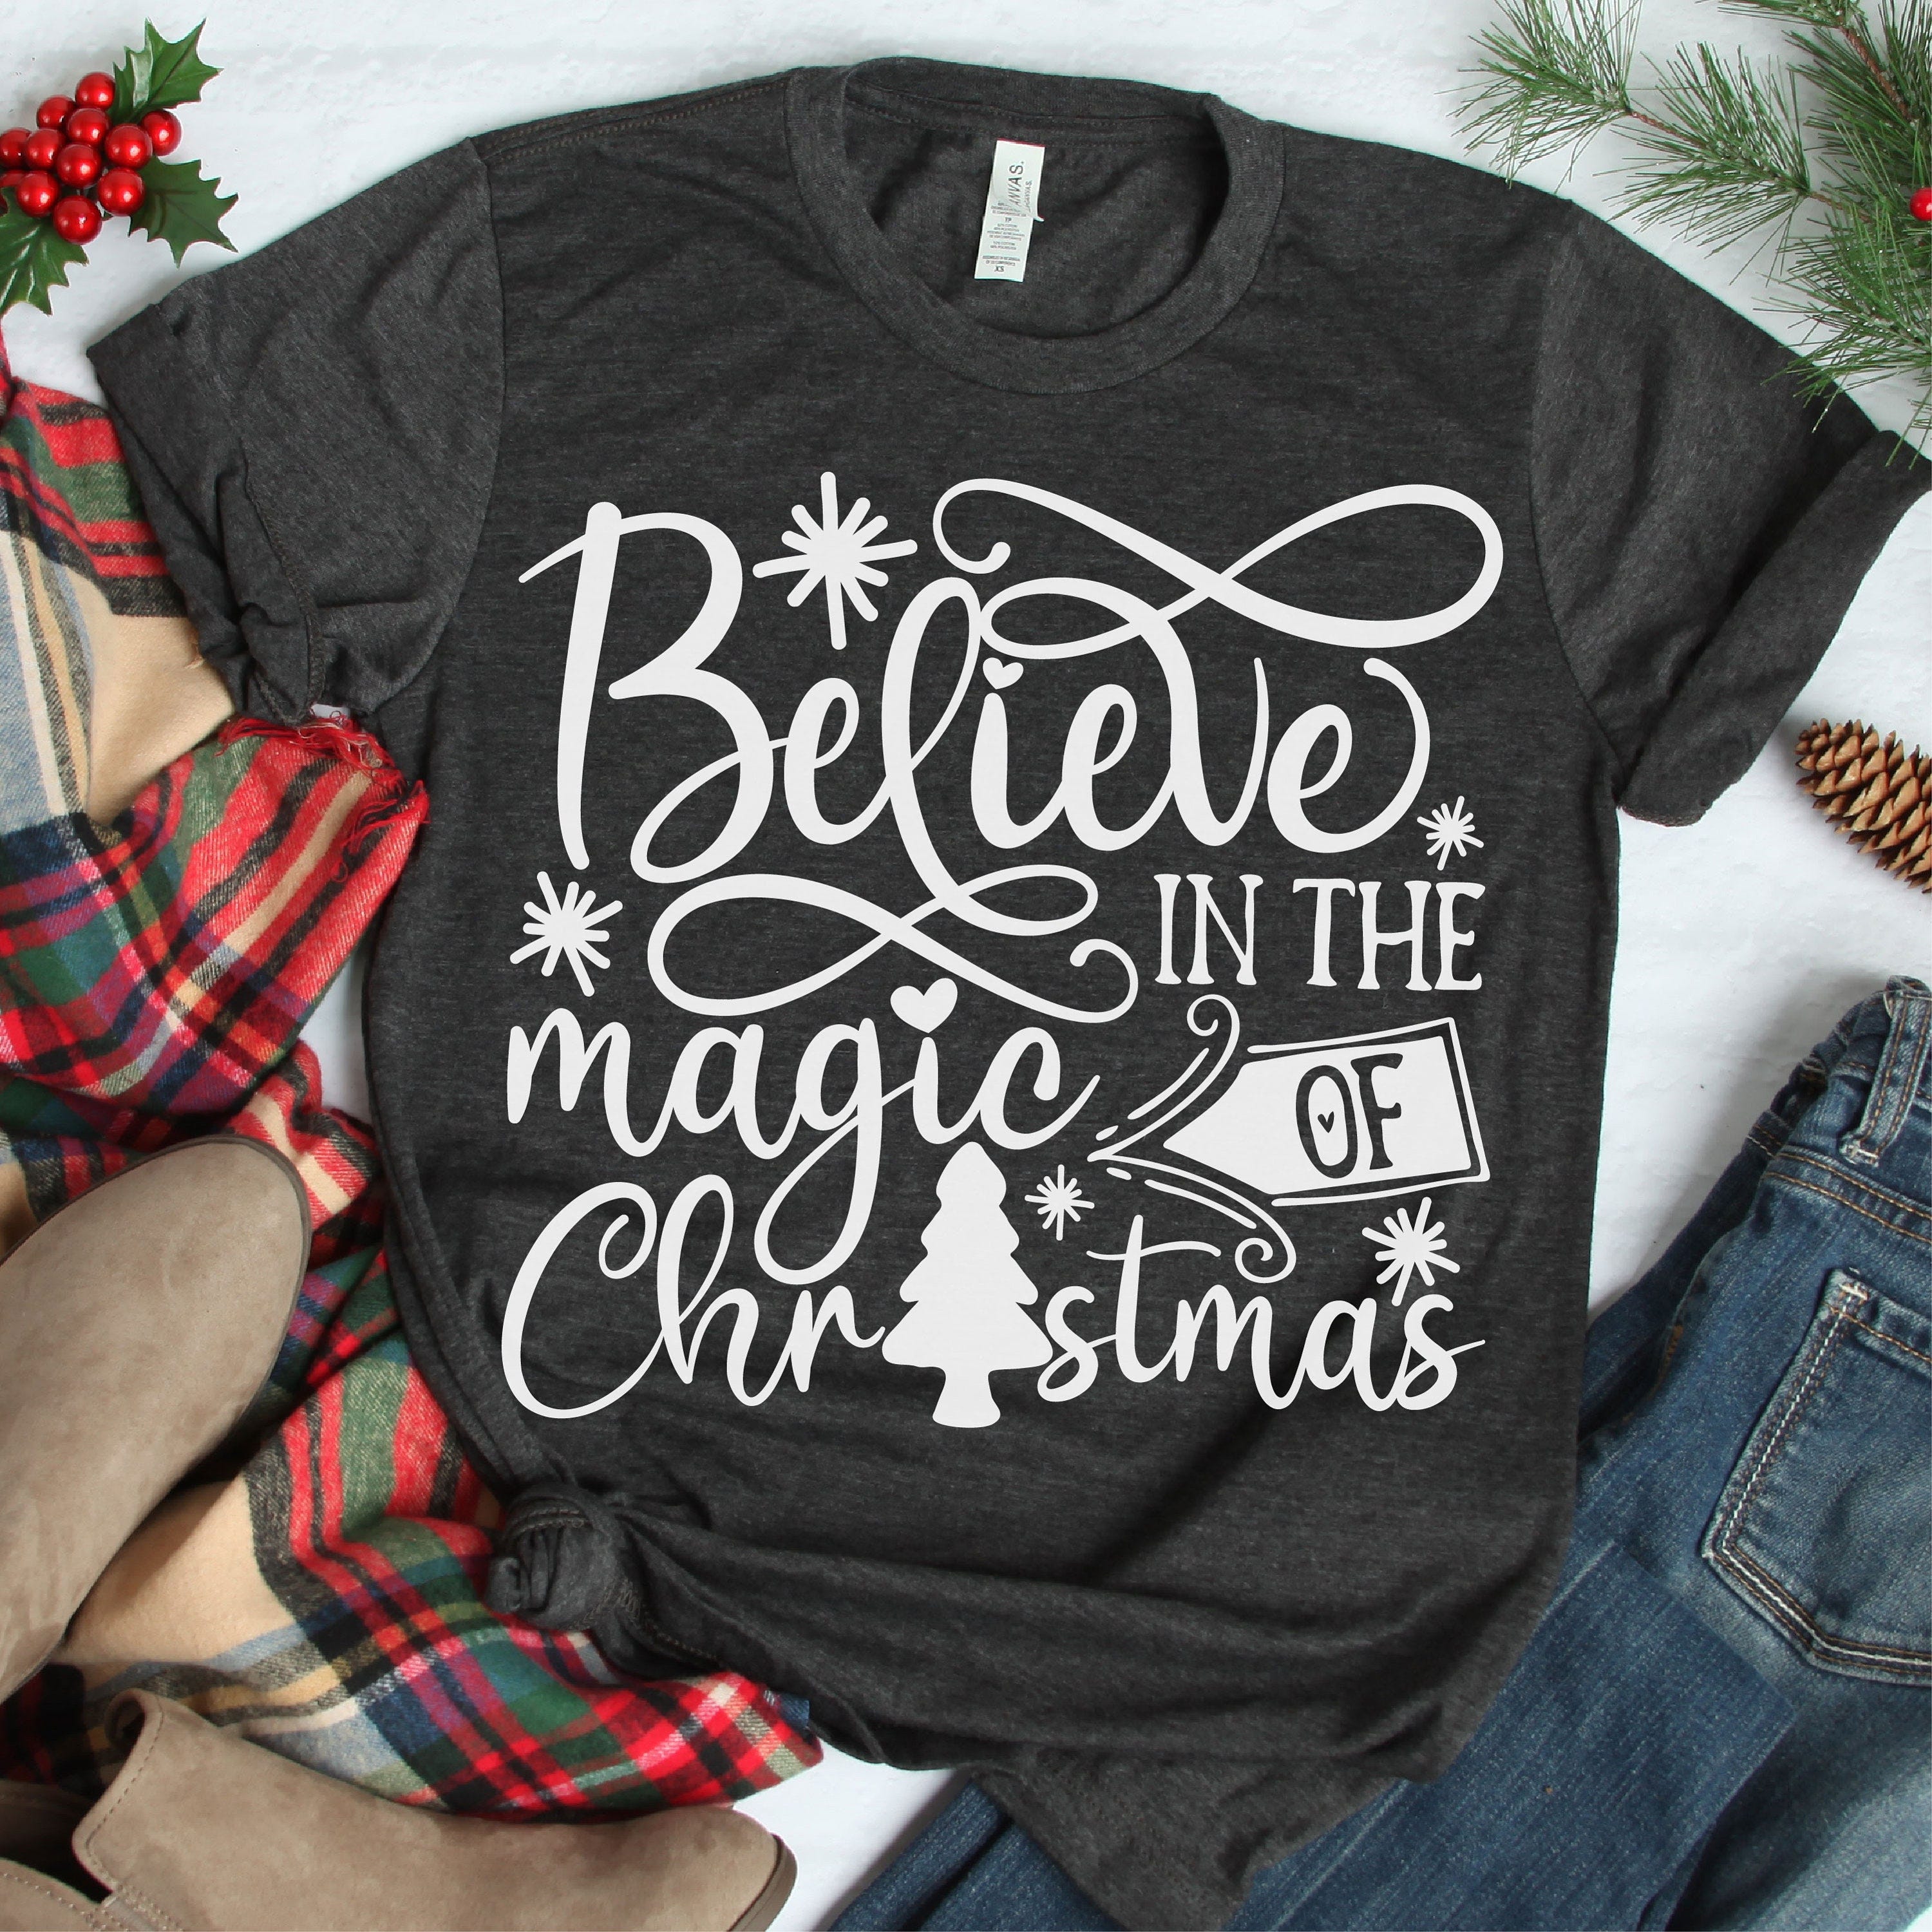 Believe in the magic of Christmas Svg, Christmas Svg Designs, Christmas Cut Files, Cricut Cut Files, PNG files, Silhouette files